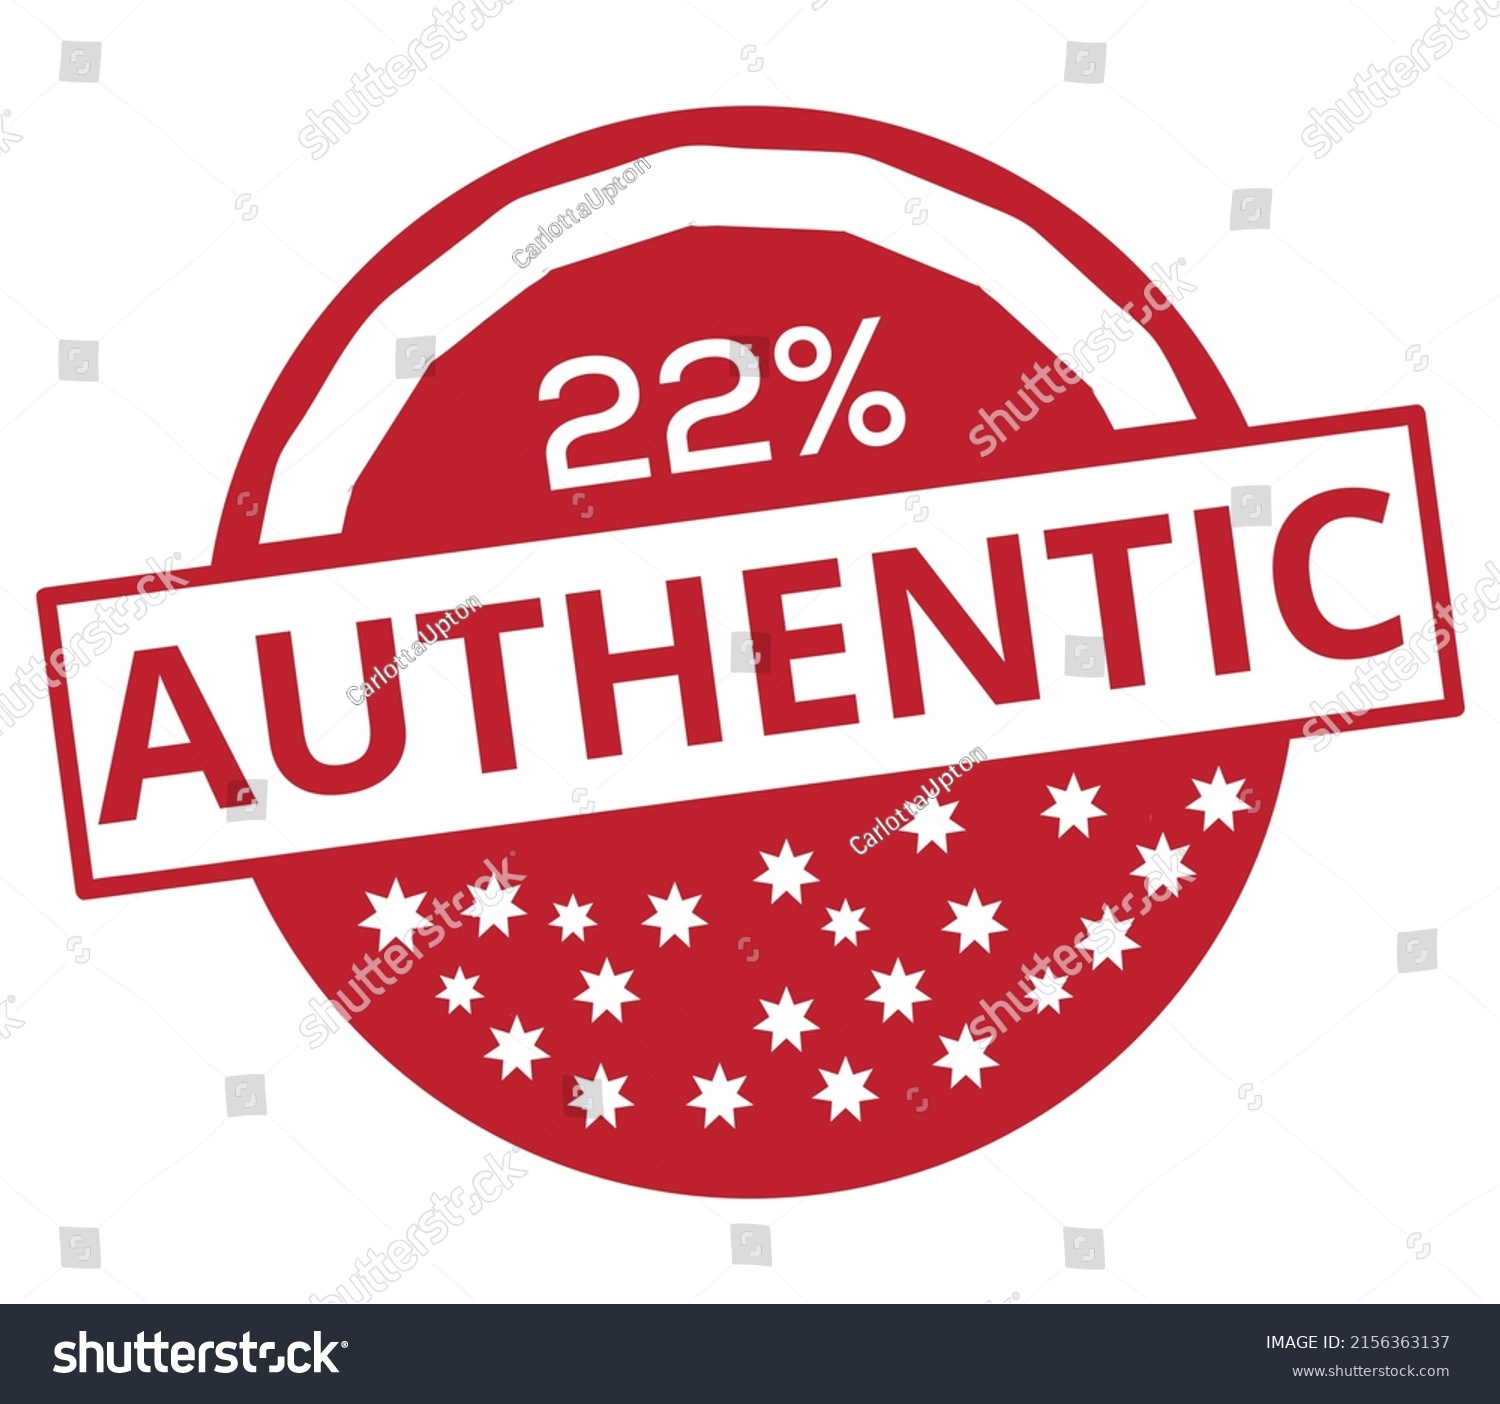 22% percentage Authentic sign label vector art illustration with fantastic font and red color #2156363137